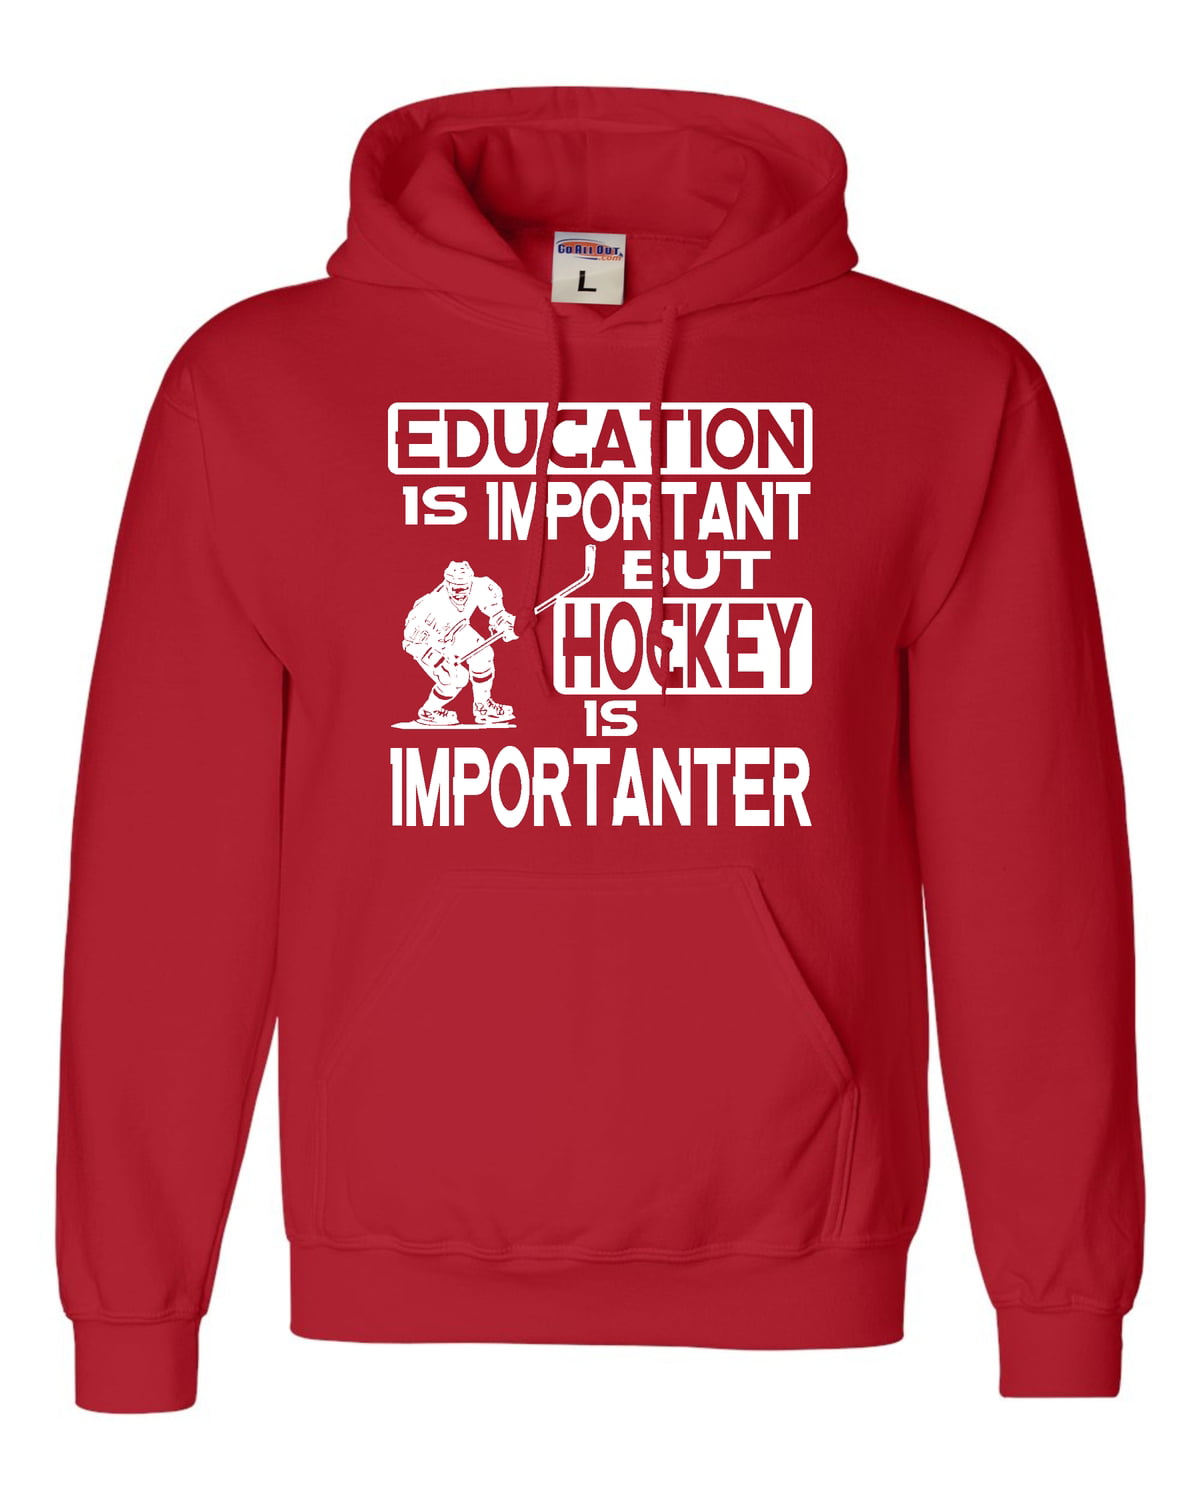 Education is Important but Theater Masks is Importanter Mens Hoodie Sweat Shirt 